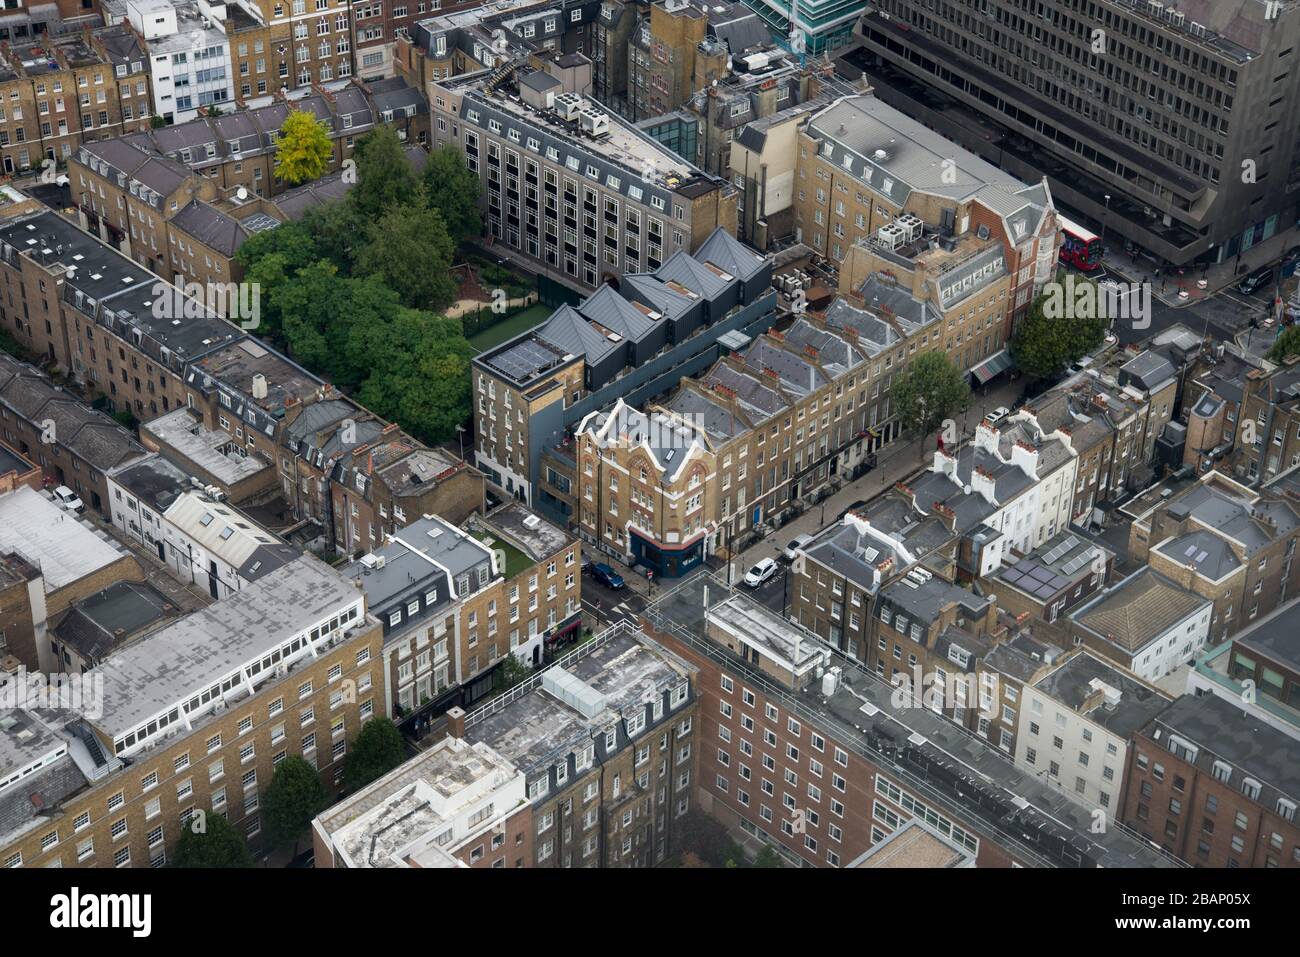 Aerial View of Whitfield Street Whitfield Place Grafton Way Suffolk House DSDHA from the BT Tower, 60 Cleveland St, Fitzrovia, London W1T 4JZ Stock Photo